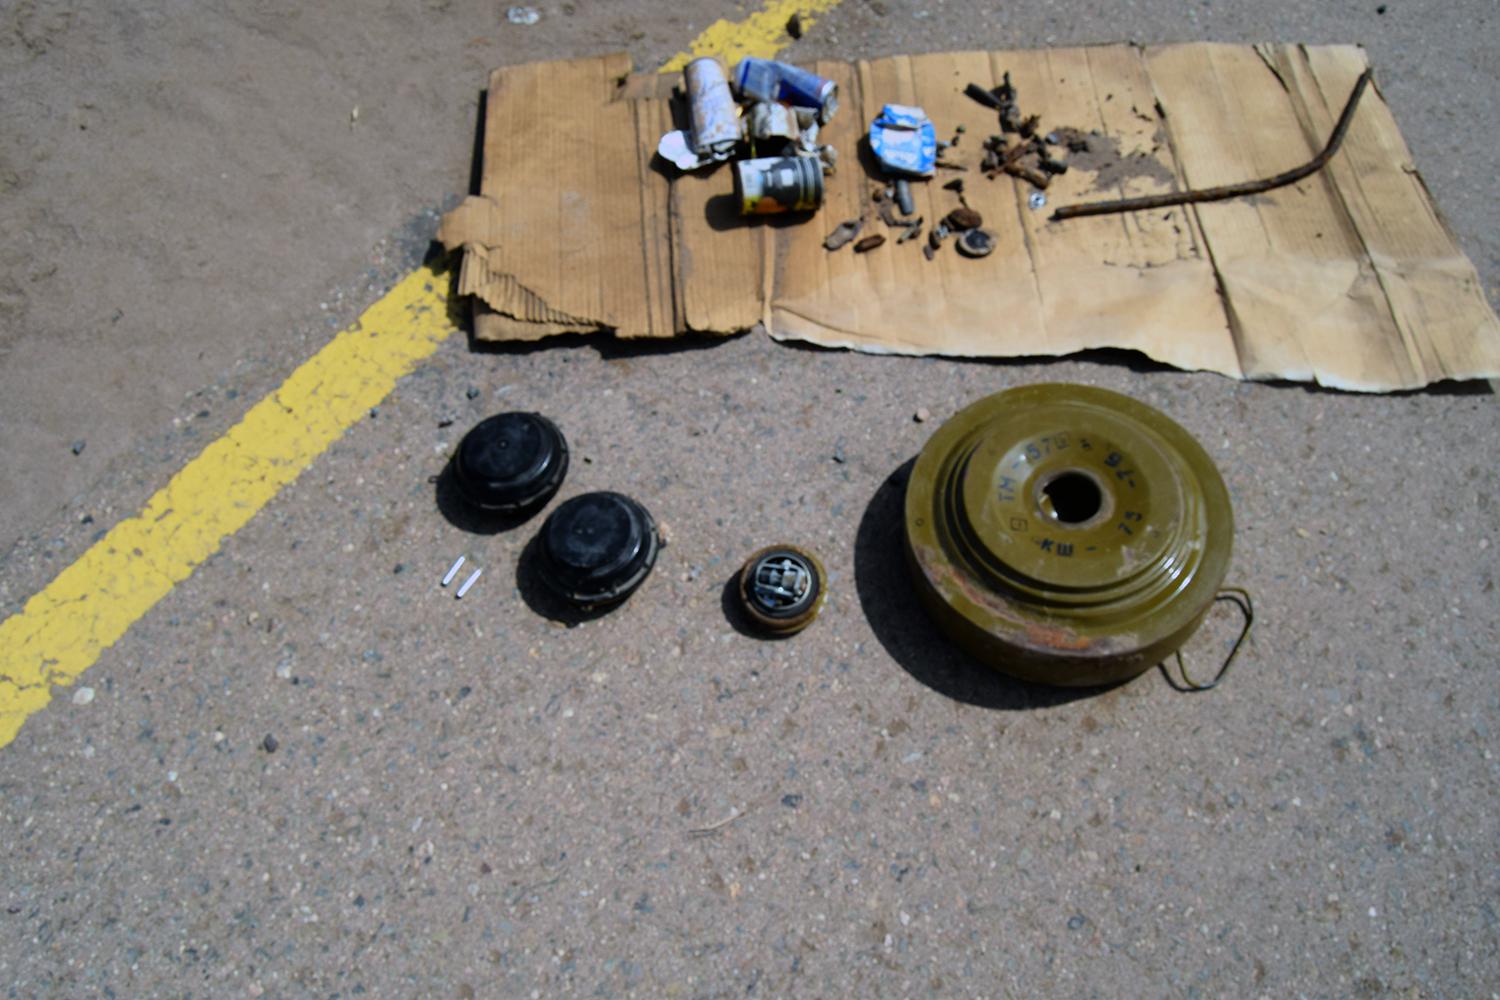 YEMAC cleared two PPM-2 antipersonnel mines and an antivehicle mine from a road in Aden on February 1, 2017. In January, the land’s owner asked YEMAC to come and check the area, as no one had conducted clearance since Houthi-Saleh forces withdrew from the